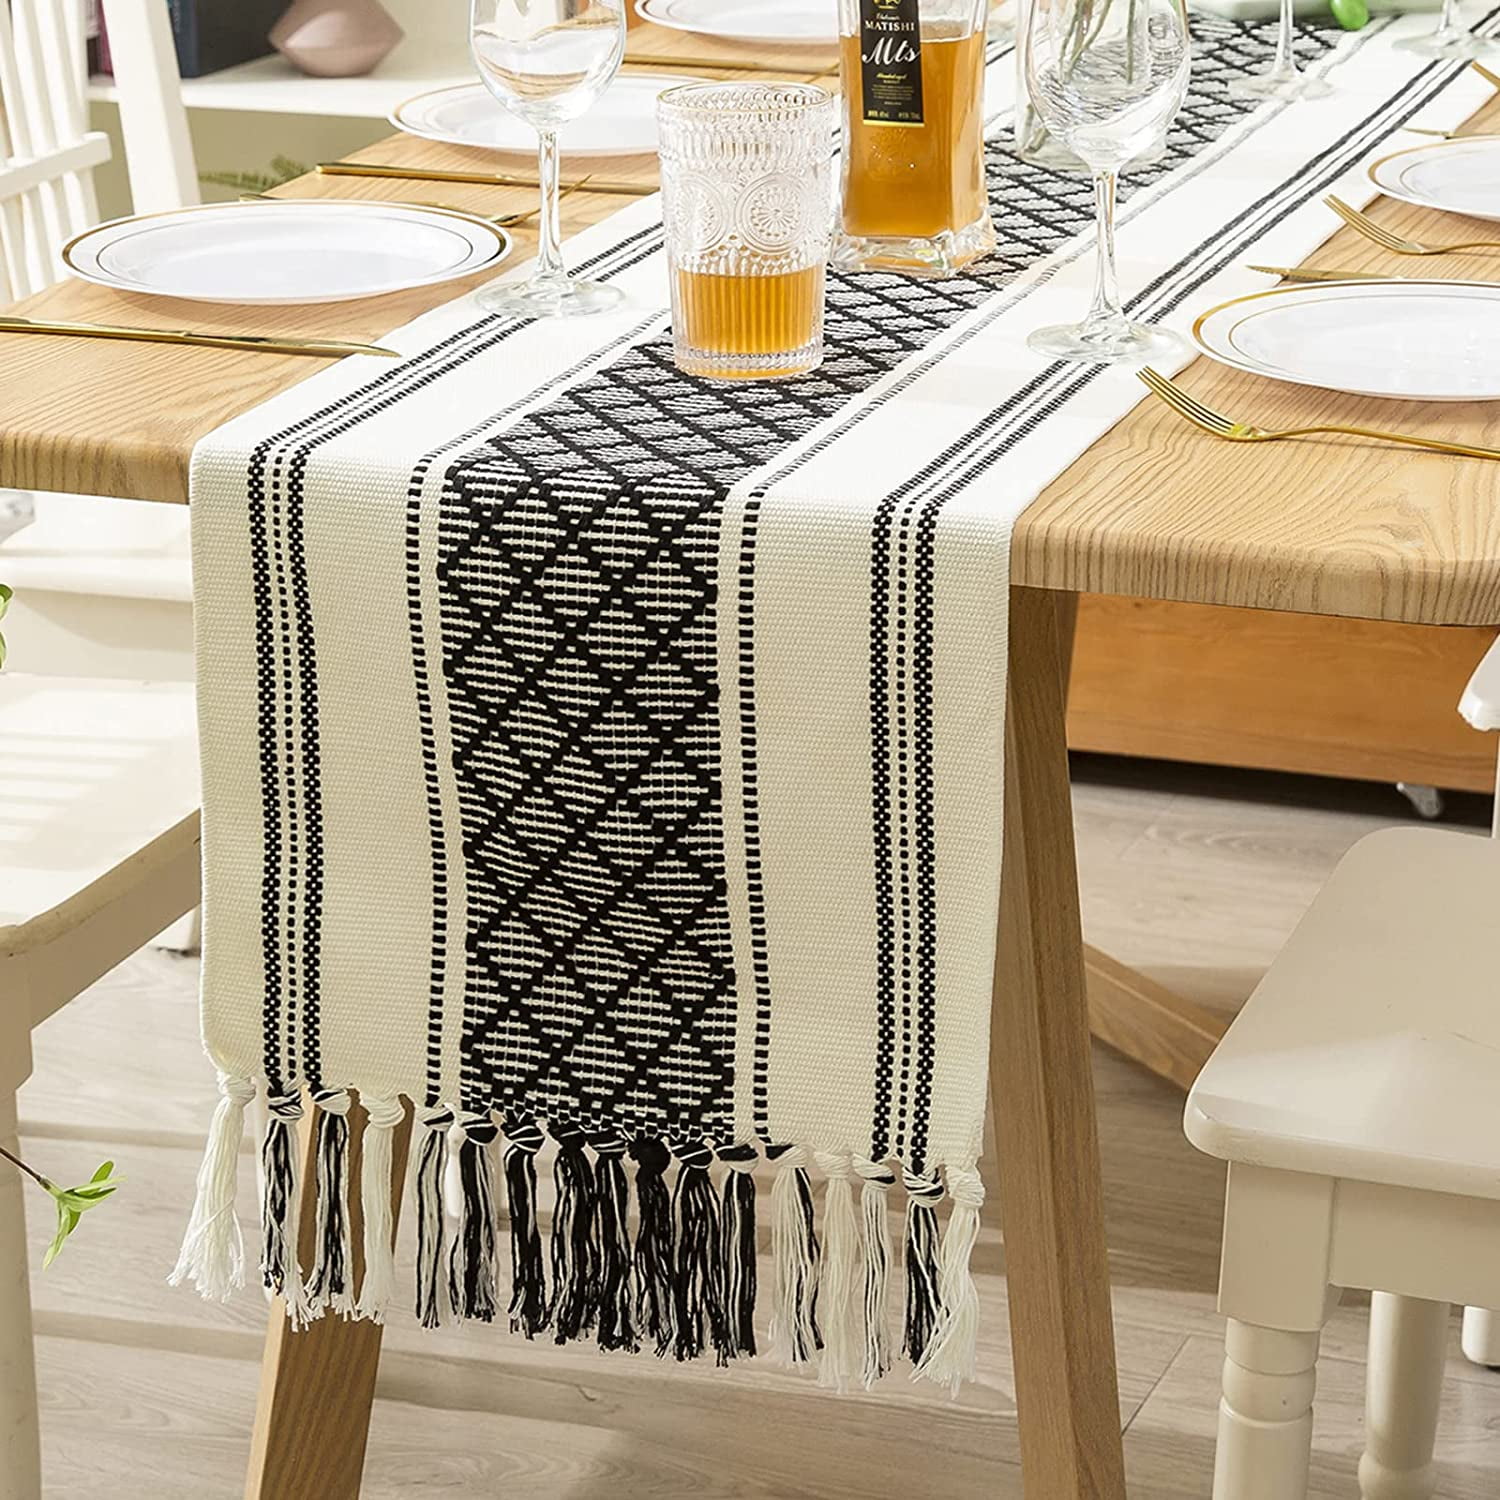 Oveesha Boho Dining Table Runner with Tassels 14 x 72 Inches, Black and Cream | Boho Dresser Scarf / Cotton Woven Console Table or Buffet Top Cover